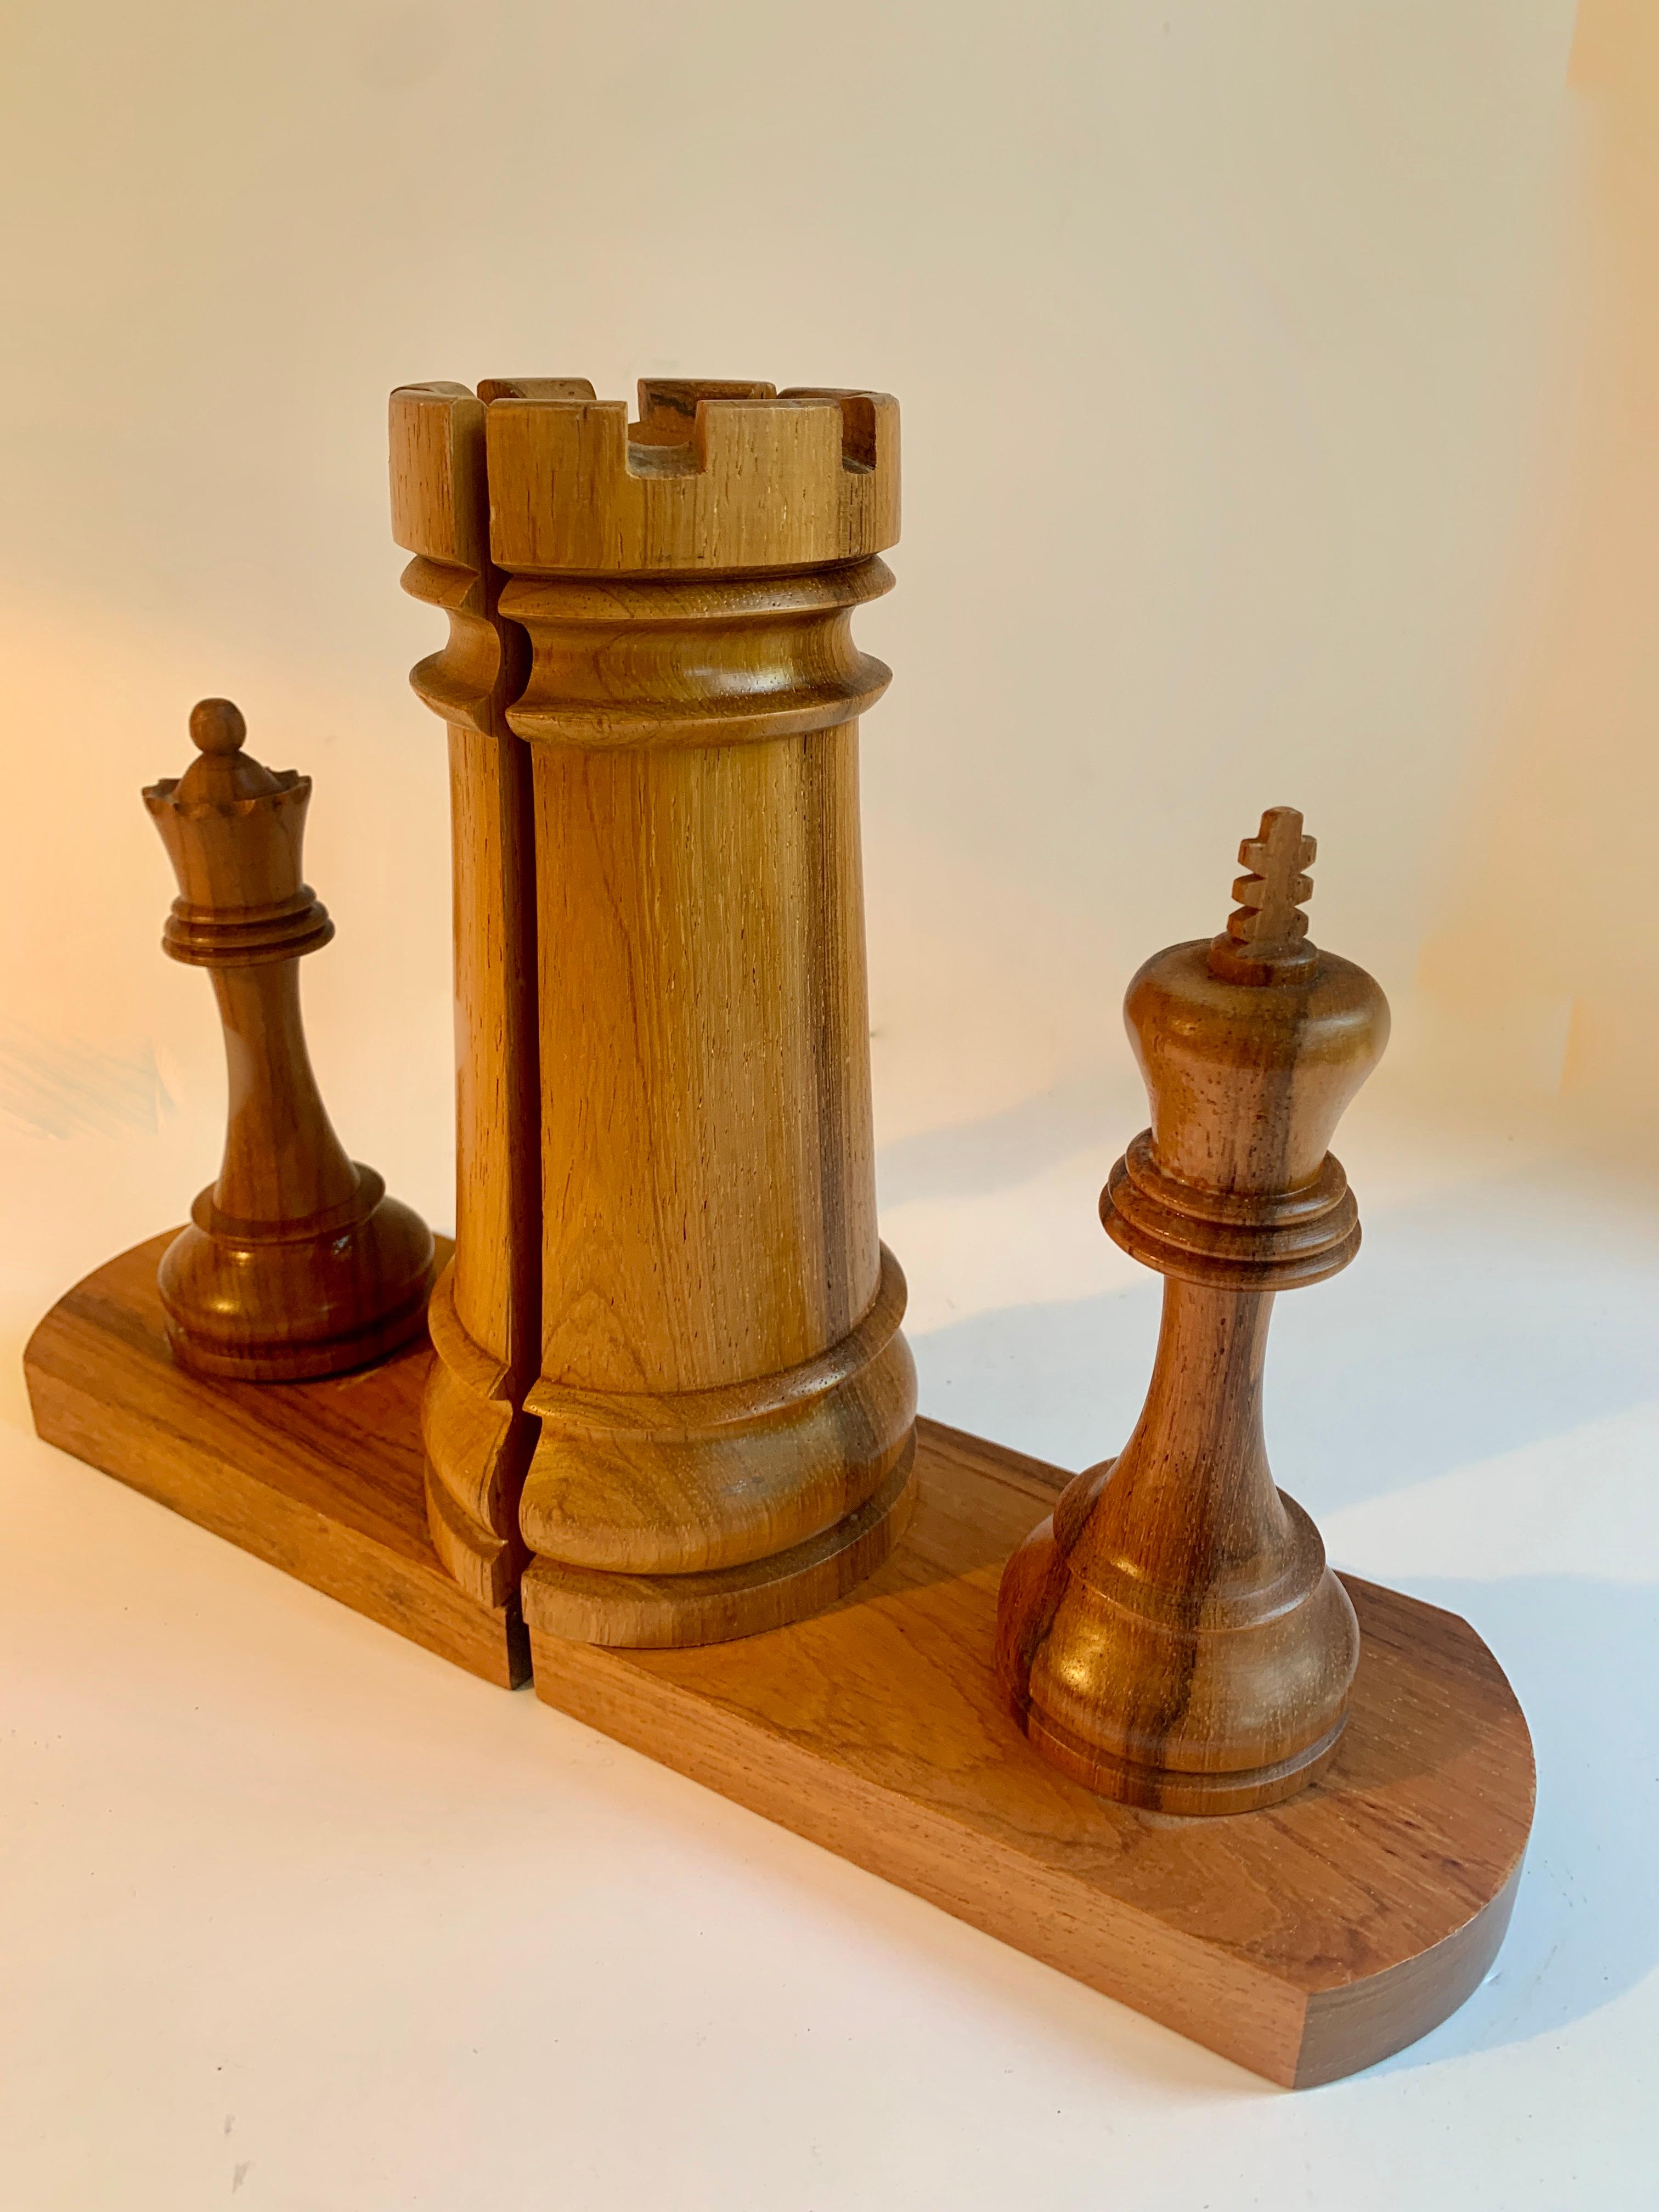 A pair of chess bookends featuring an oversized wooden rook with a 7.5